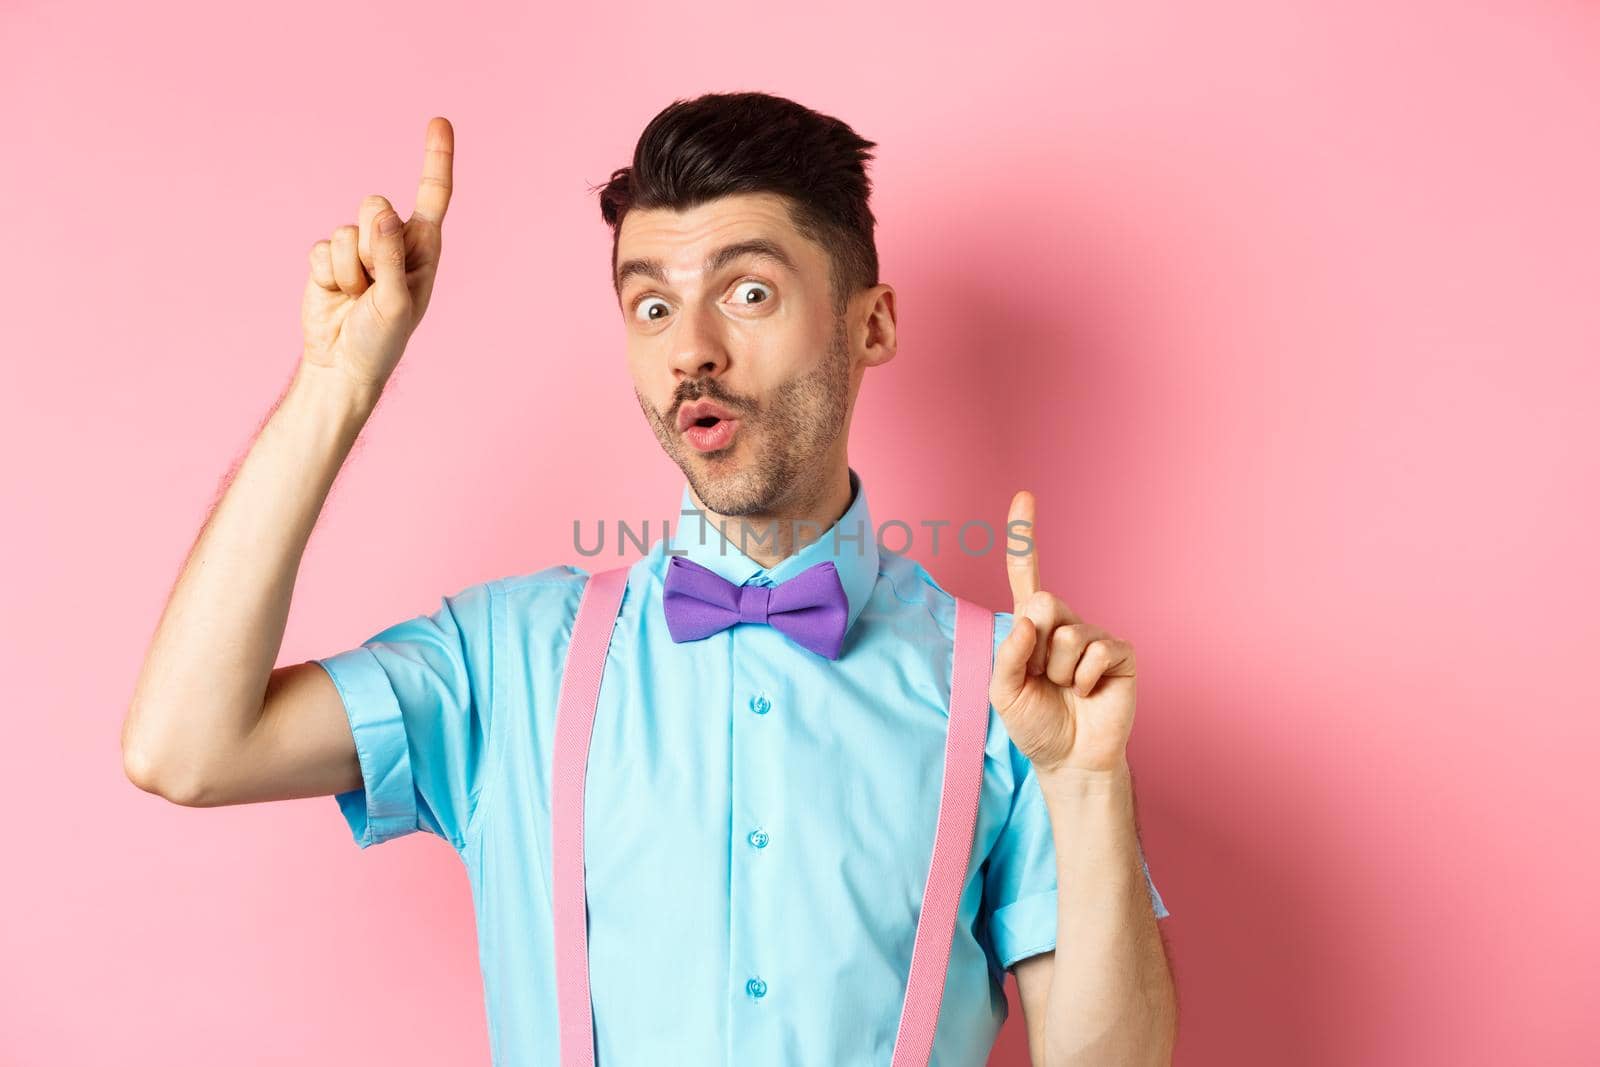 Cheerful funny man dancing in bow-tie and suspenders, pointing fingers up and looking upbeat, standing over pink background.